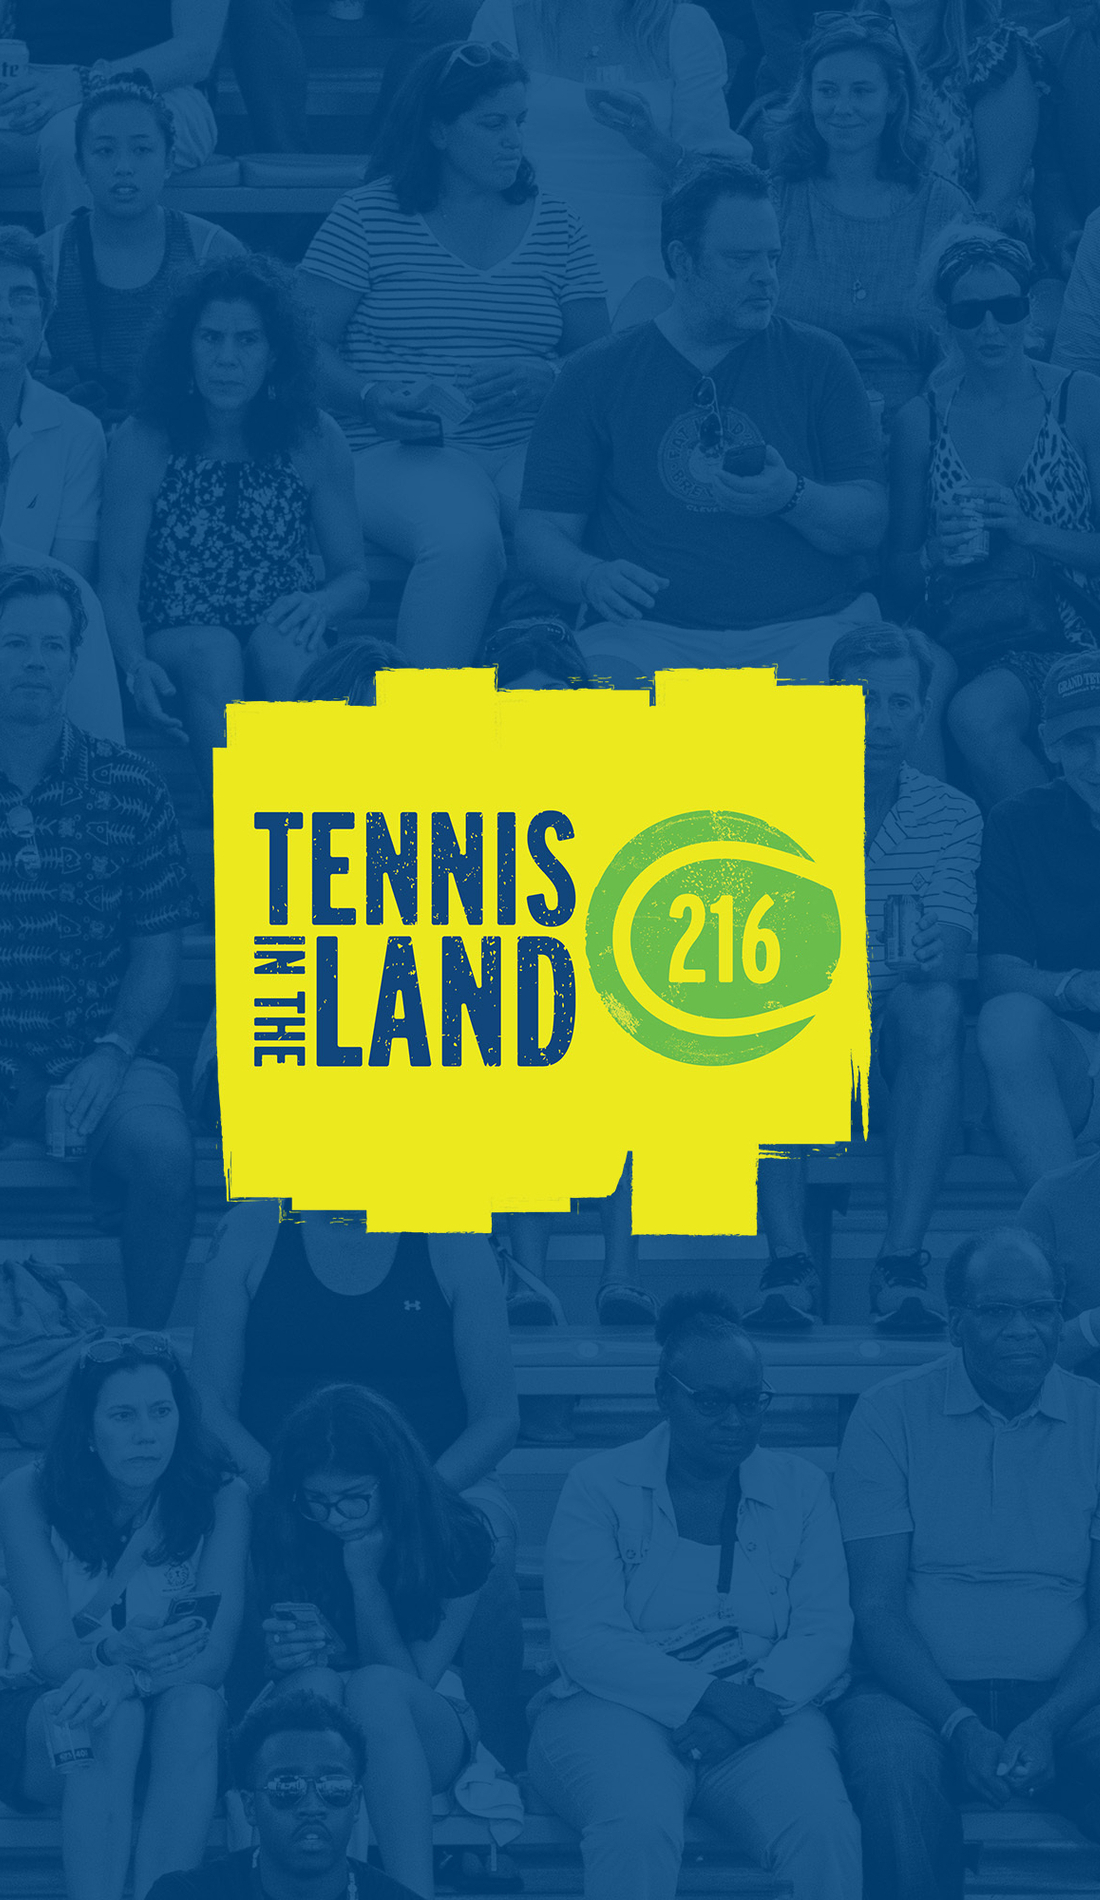 A Tennis in the Land live event